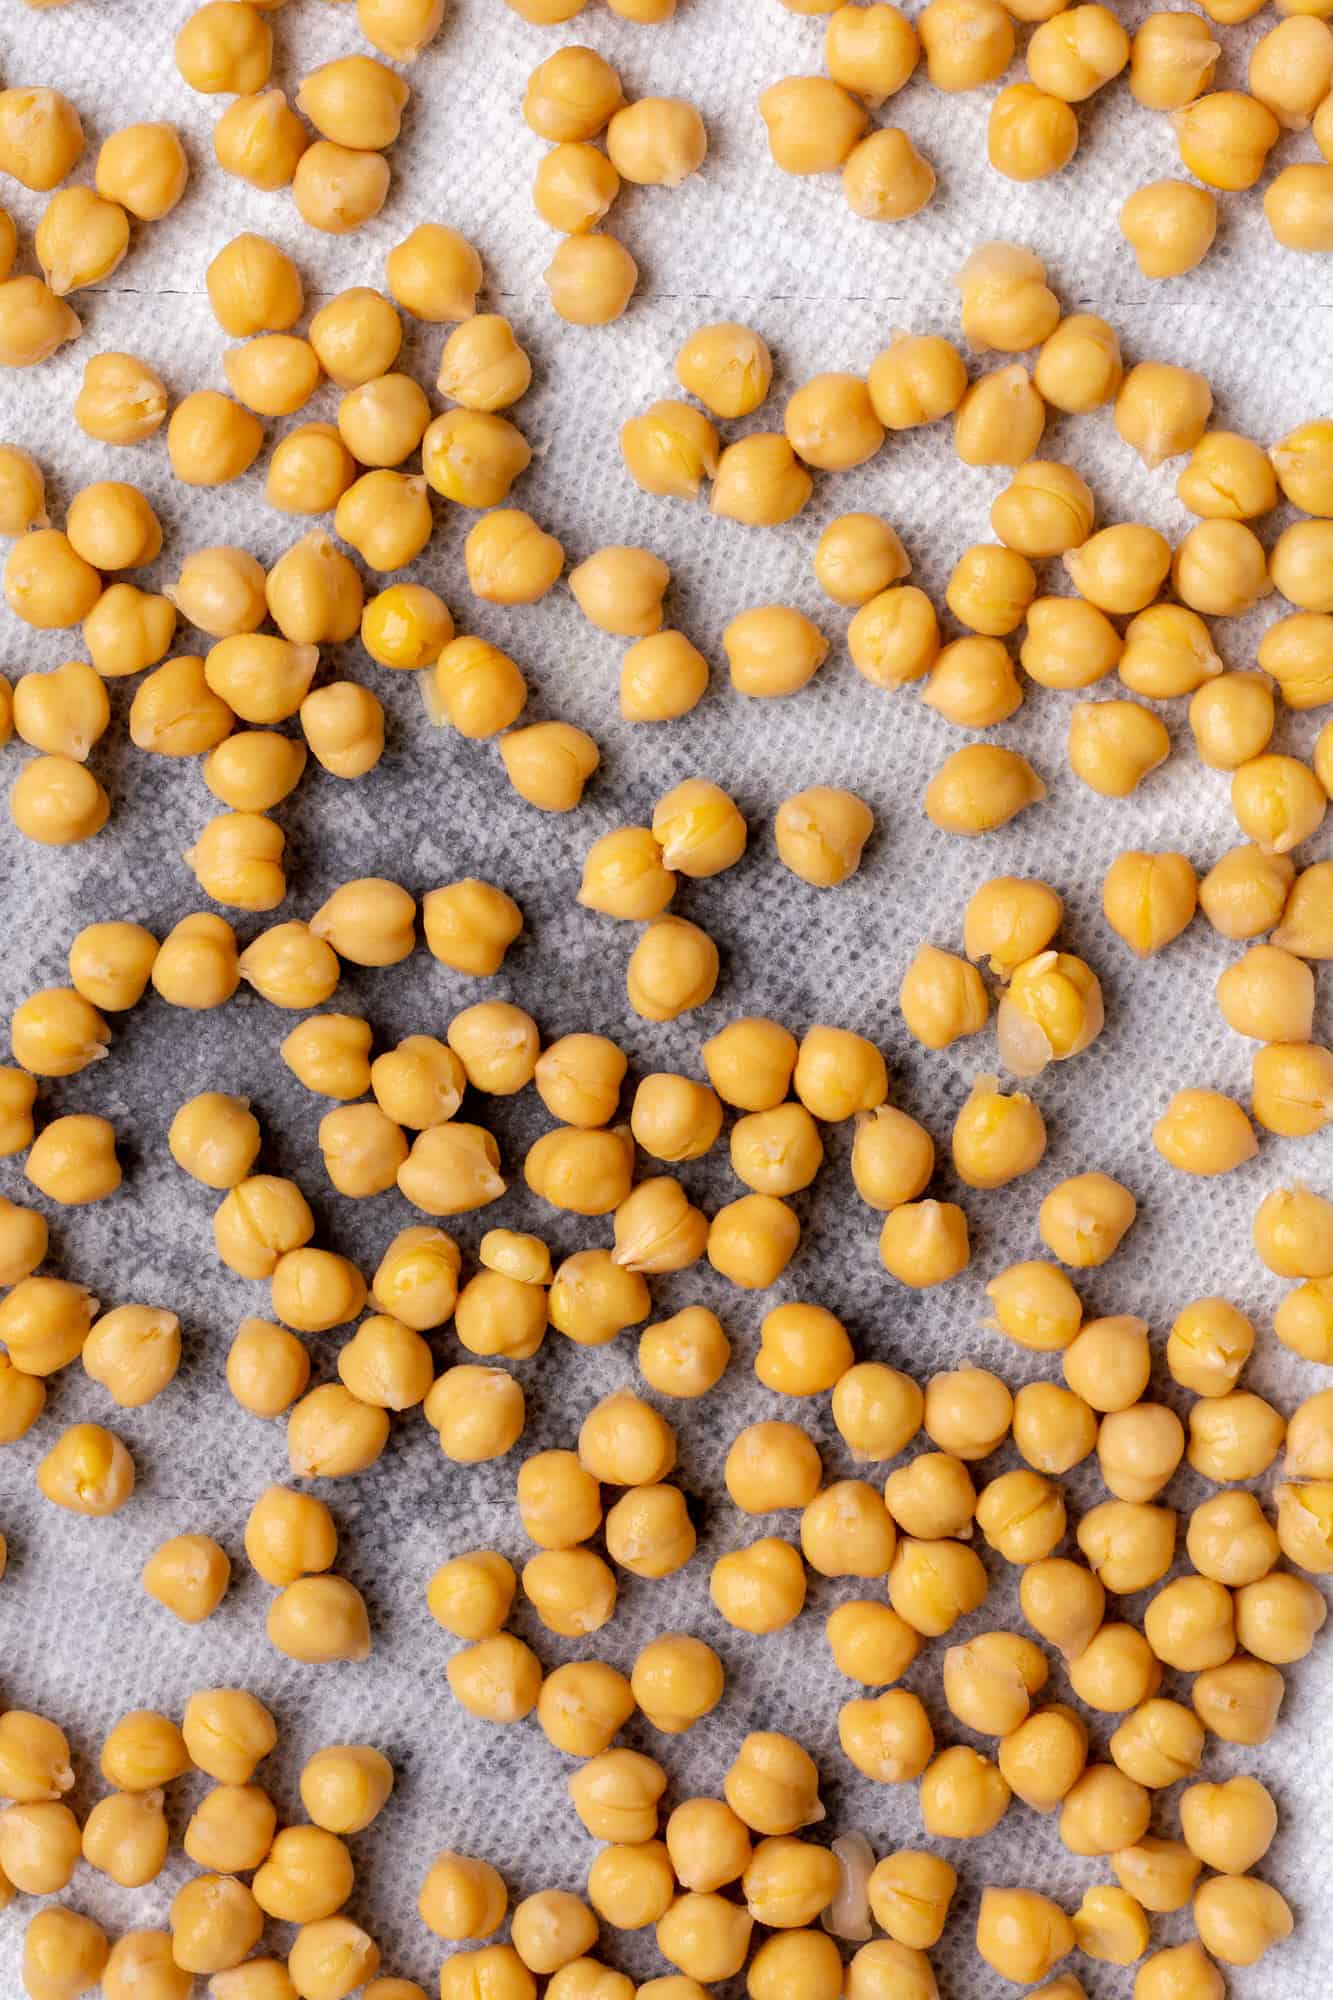 wet chickpeas on a paper towel